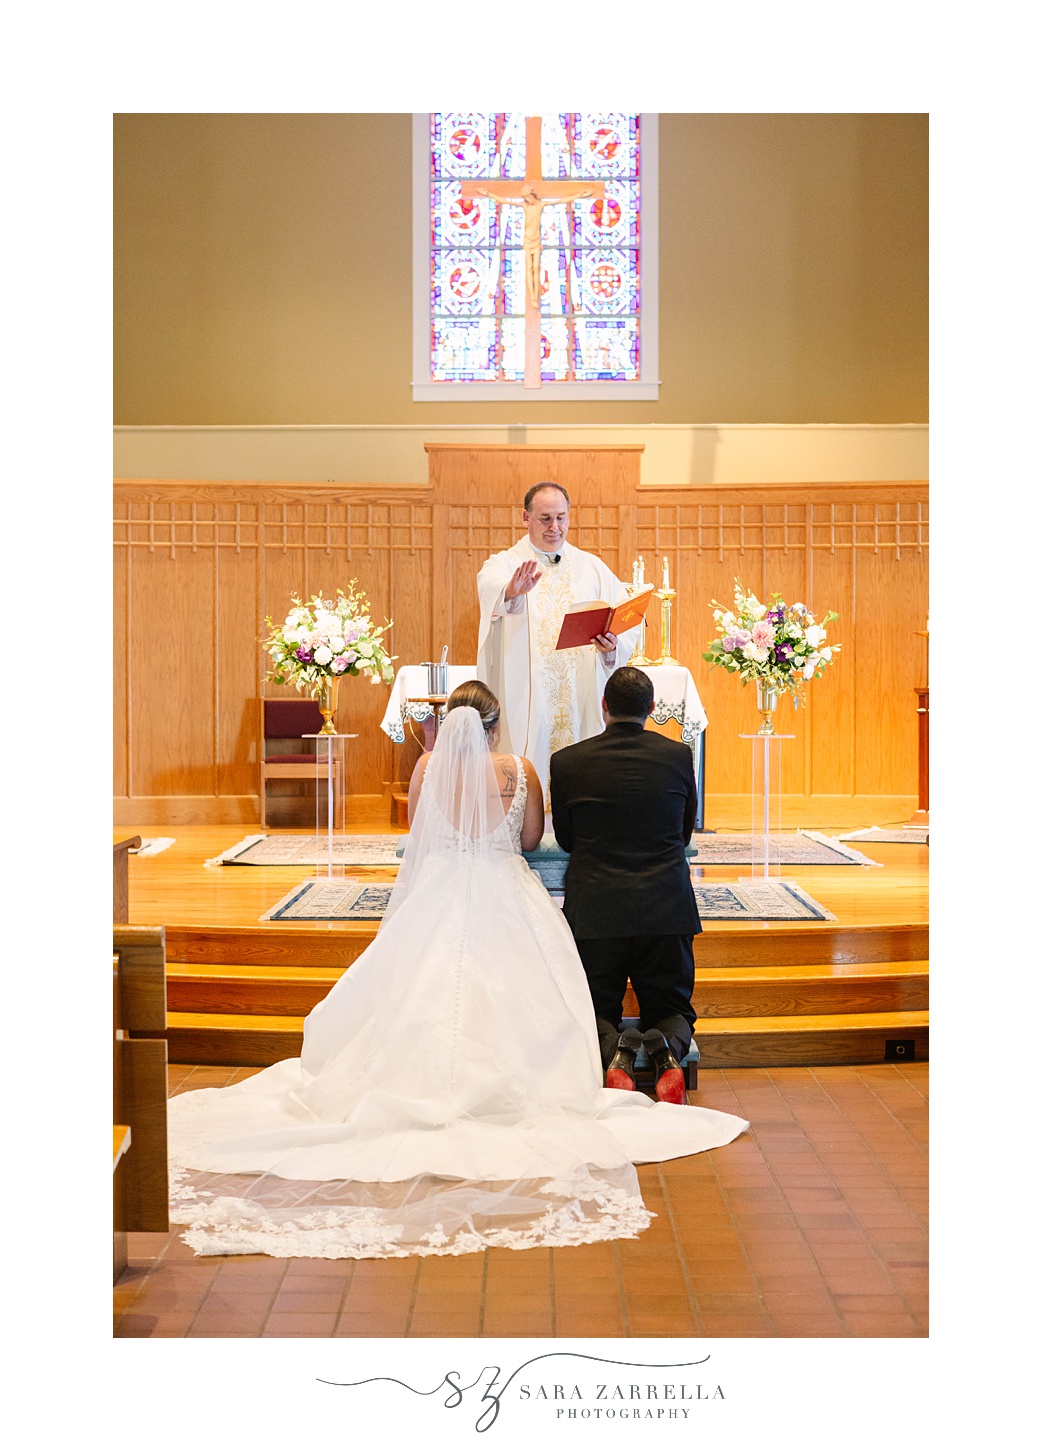 newlyweds kneel at front of church during traditional wedding ceremony in Rhode Island church